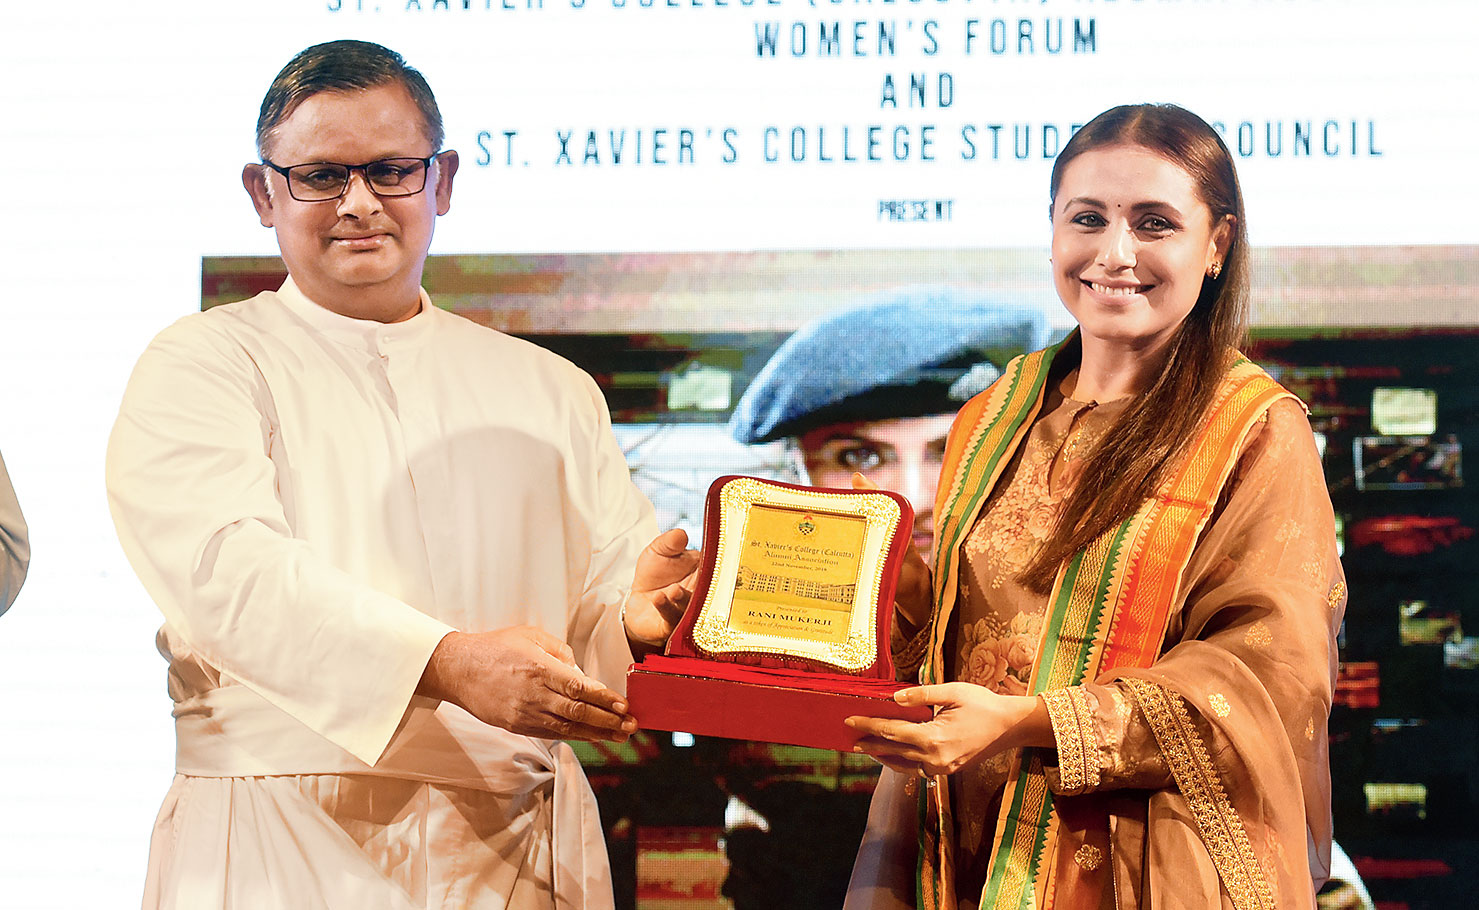 Rani was felicitated by Father Dominic Savio, the principal of St. Xavier’s College. “I don’t think anyone is here to listen to me... they are all here to listen to you! Despite exams, the students have come to hear and meet you and it’s a packed audience,” he told Rani.